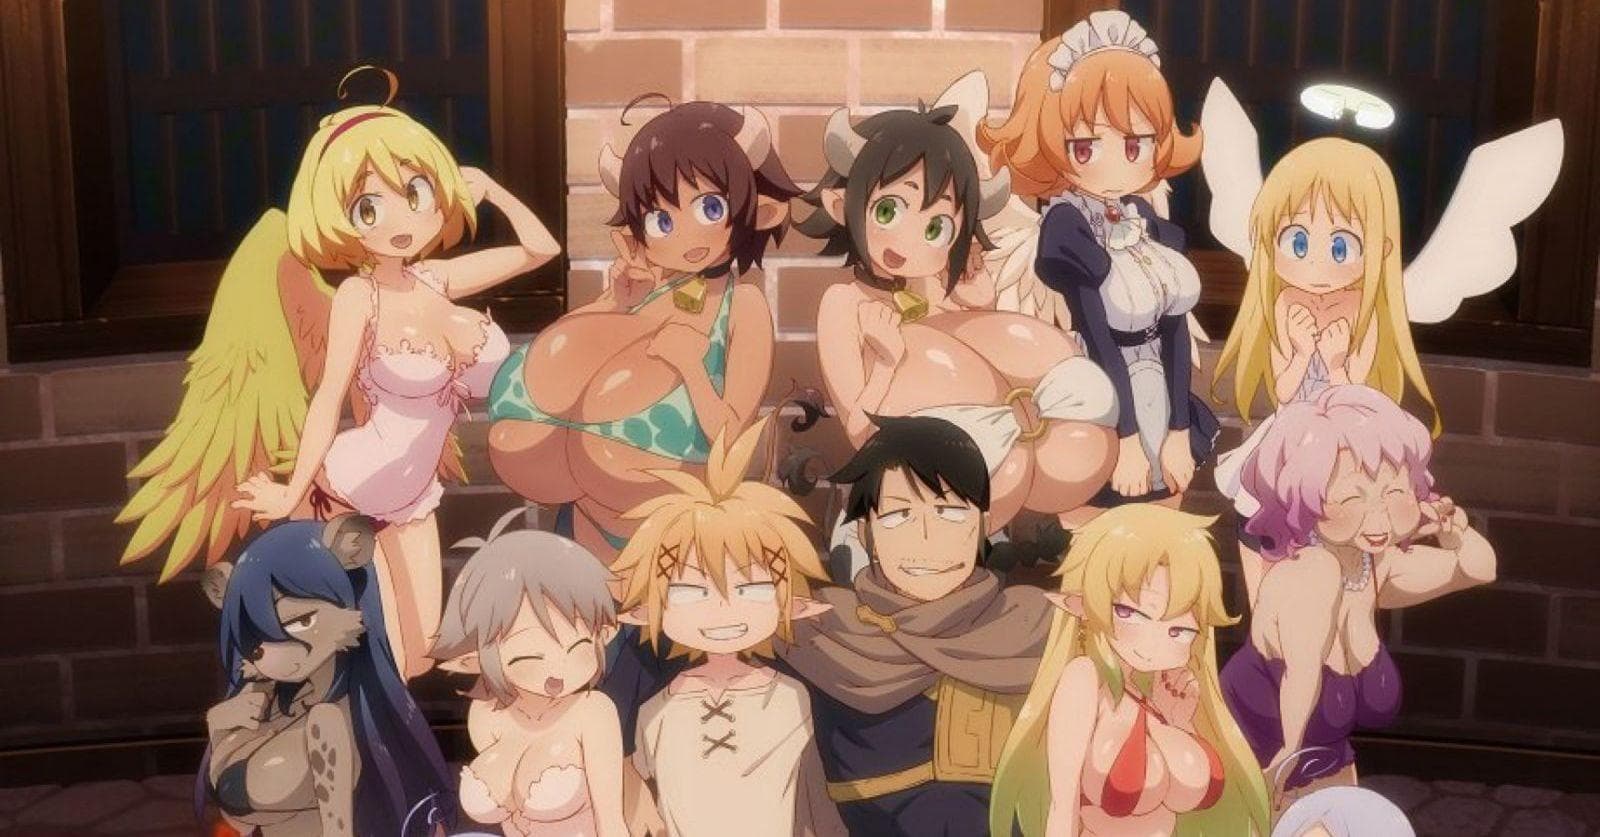 arbel plano add photo ecchi anime with lots of nudity